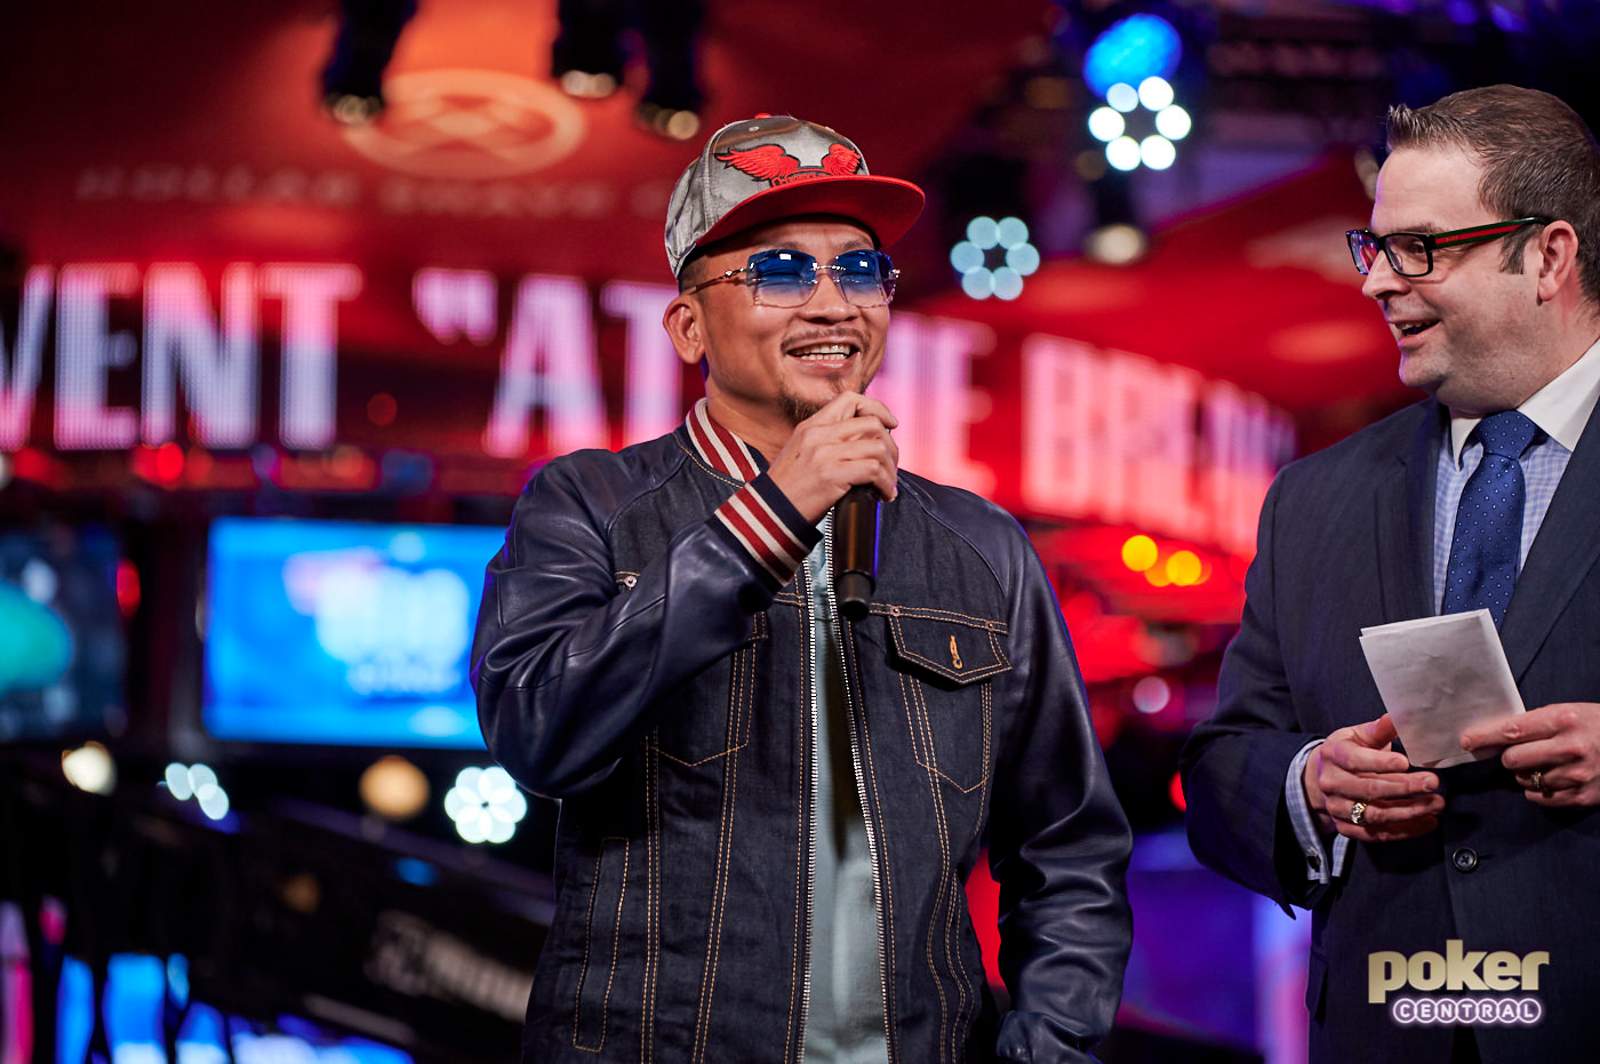 WSOP Main Event Day 2ab: Former Champ Qui Nguyen Bosses the Day, Galen Hall, Timothy Su and Anton Morgenstern Riding High